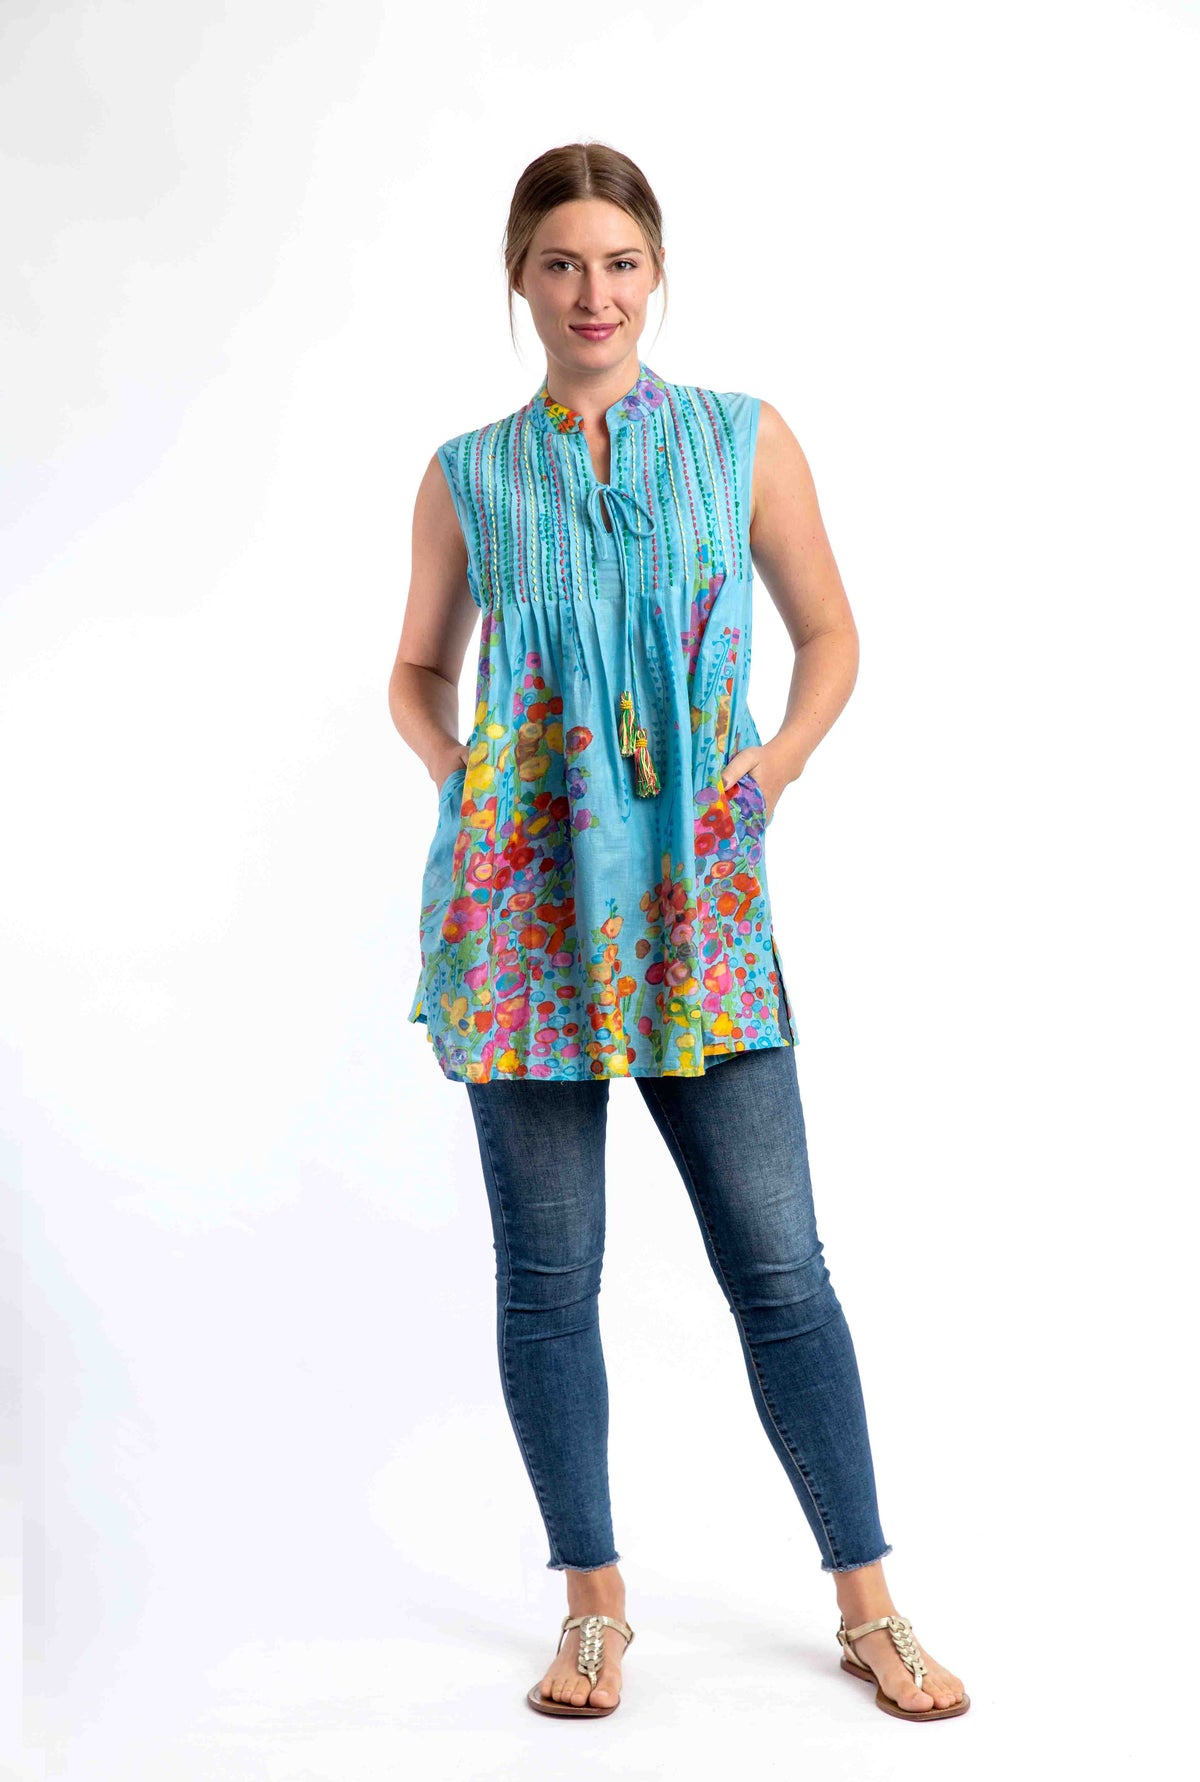 Casuarina Embroidered Top in Midday Blue Spring